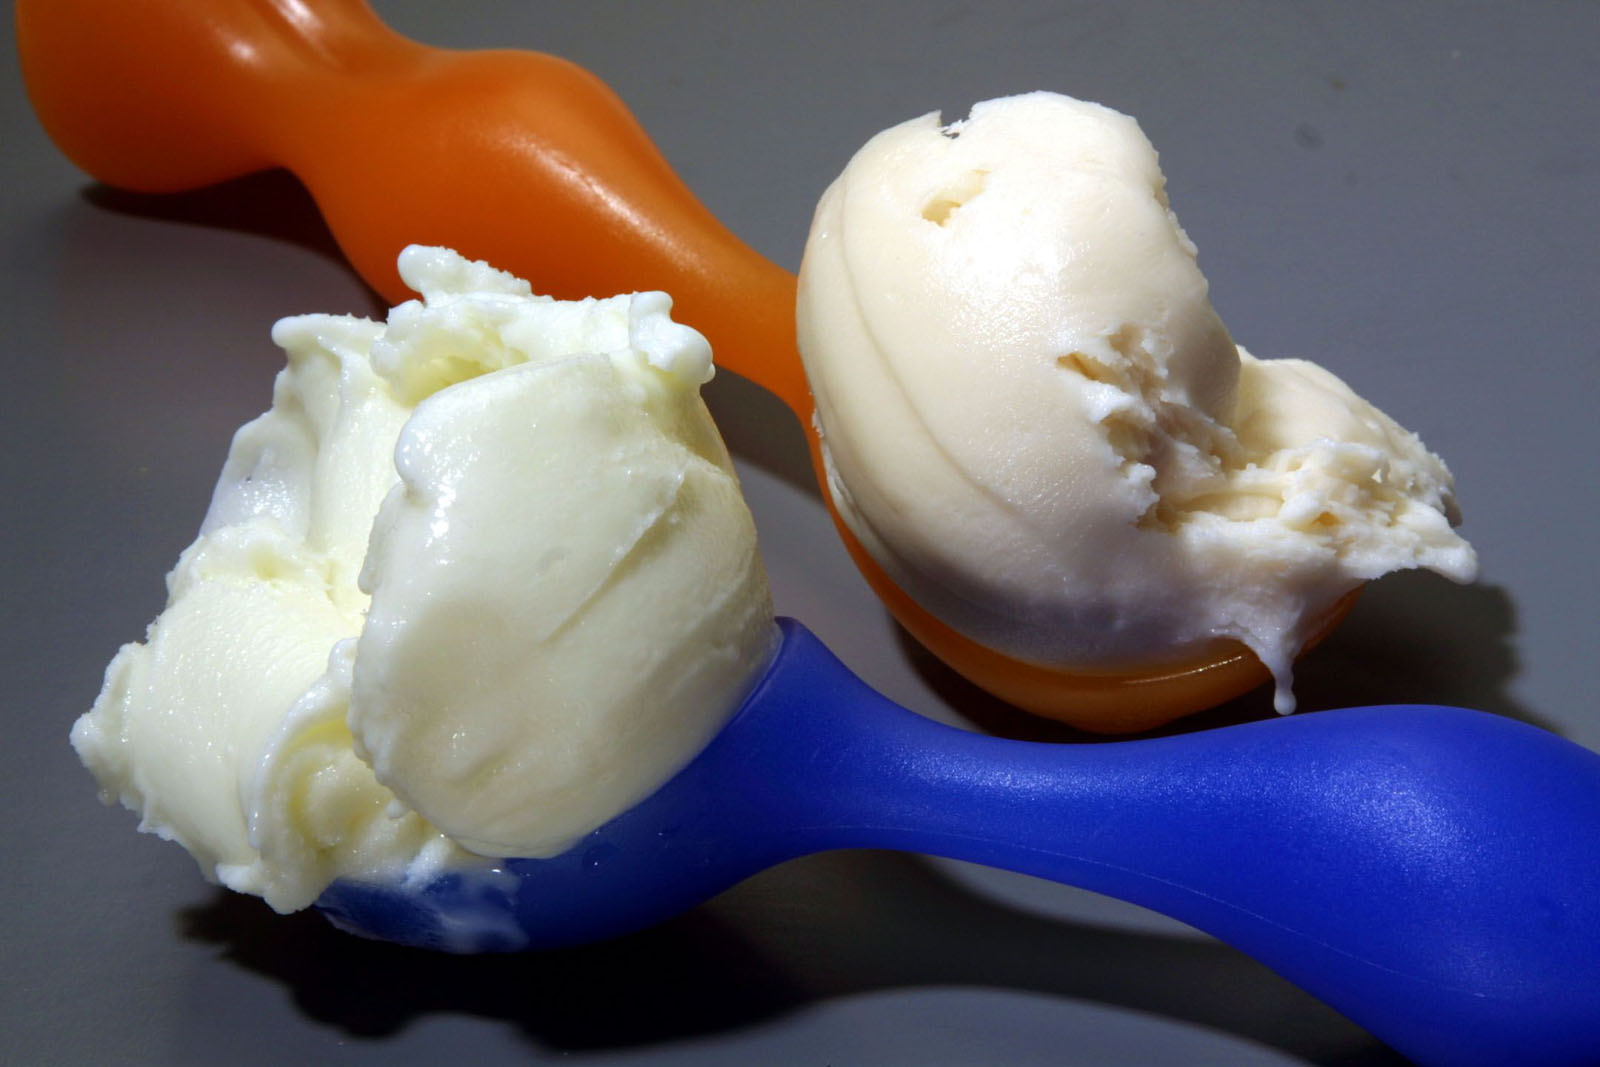 Image: Ice cream with lupin proteins